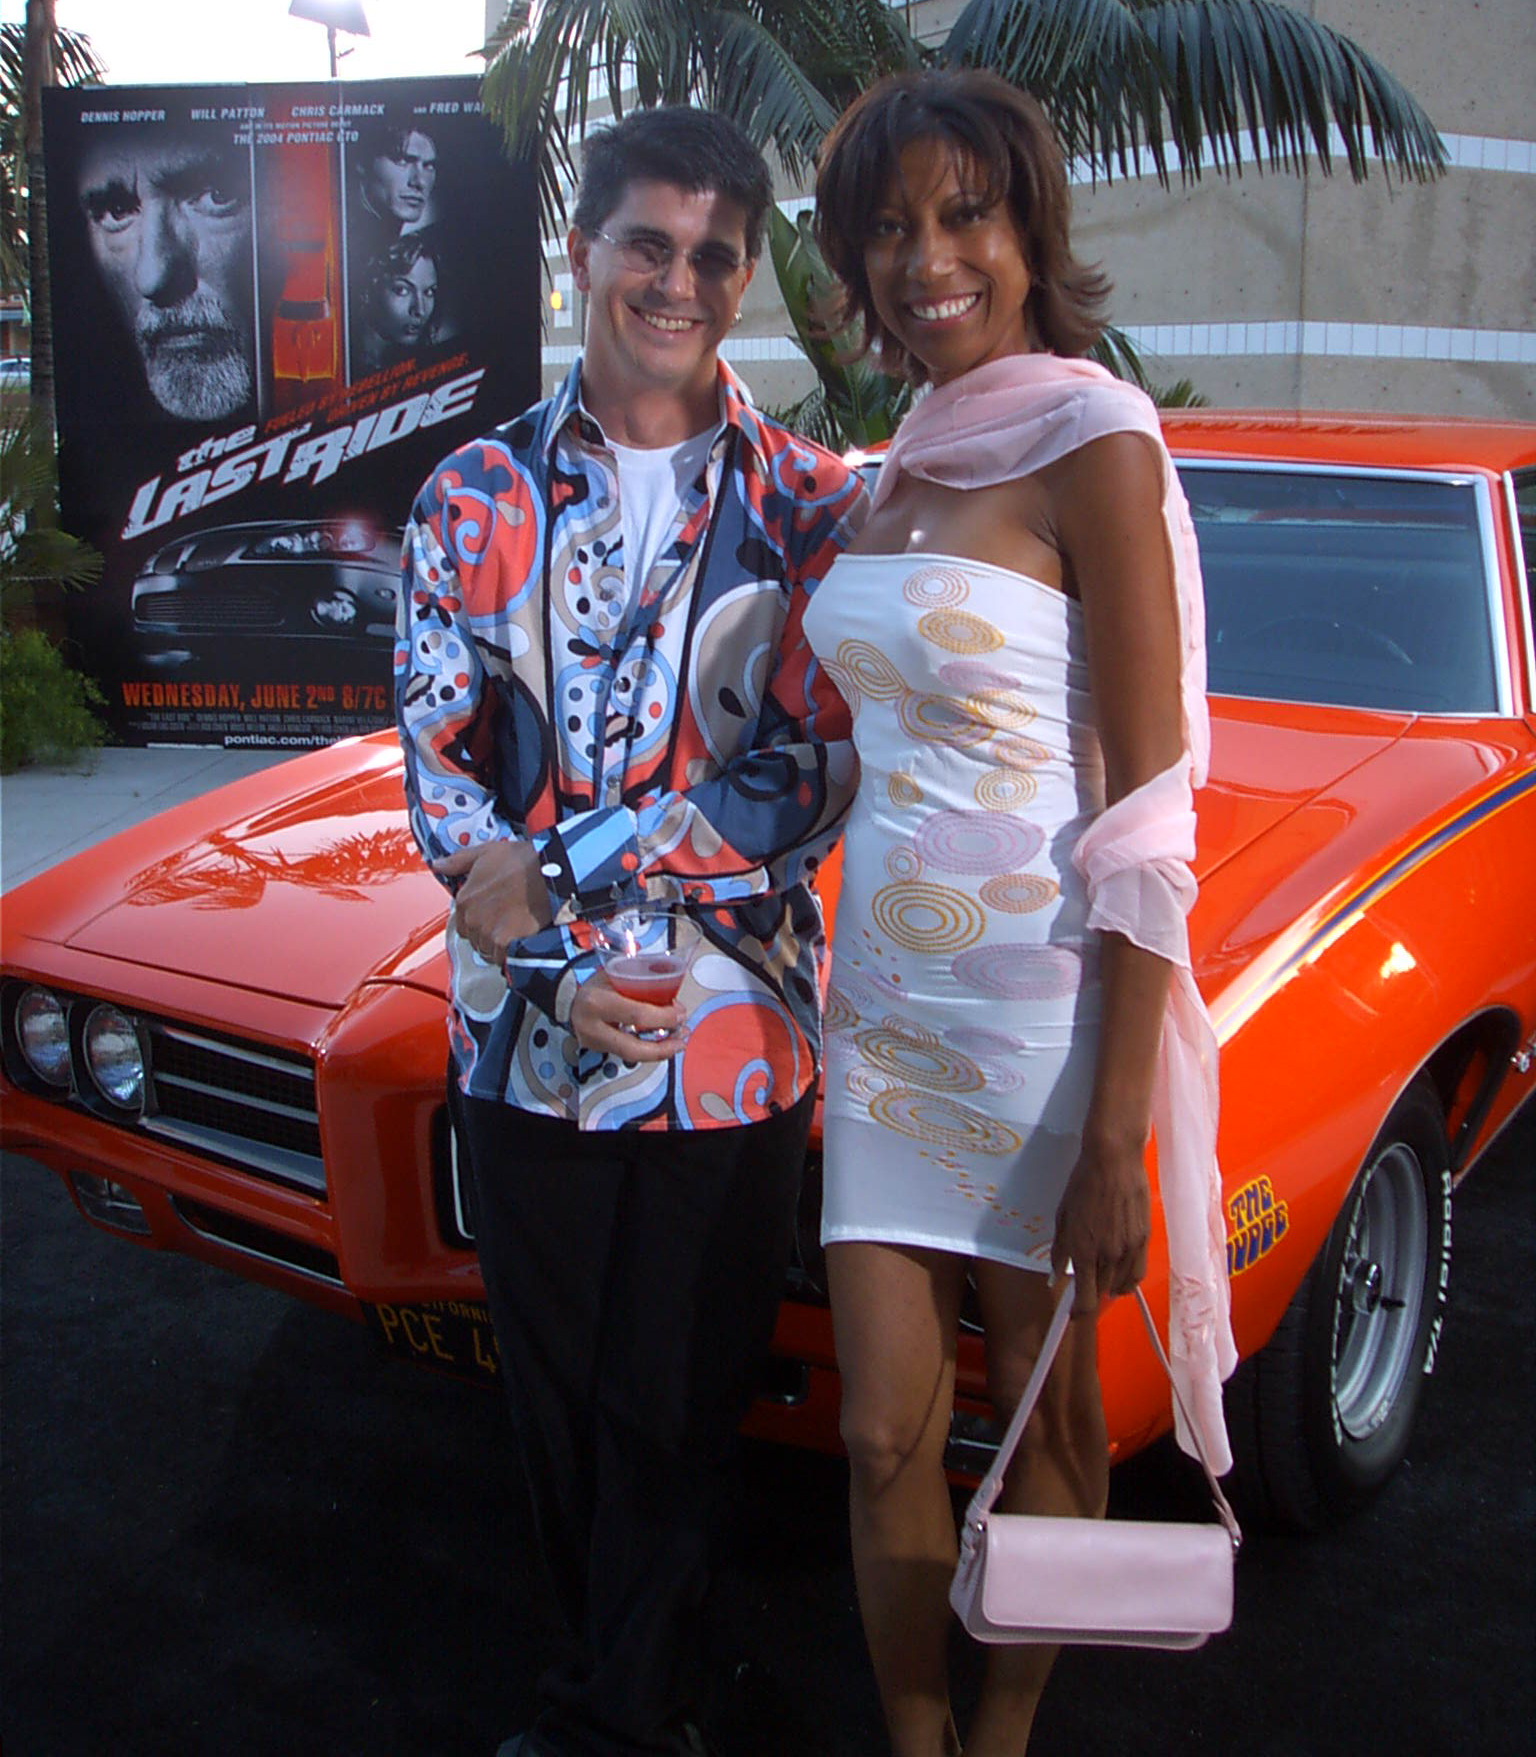 Gwendolyn Oliver and director Guy Norman Bee at The Last Ride Premiere